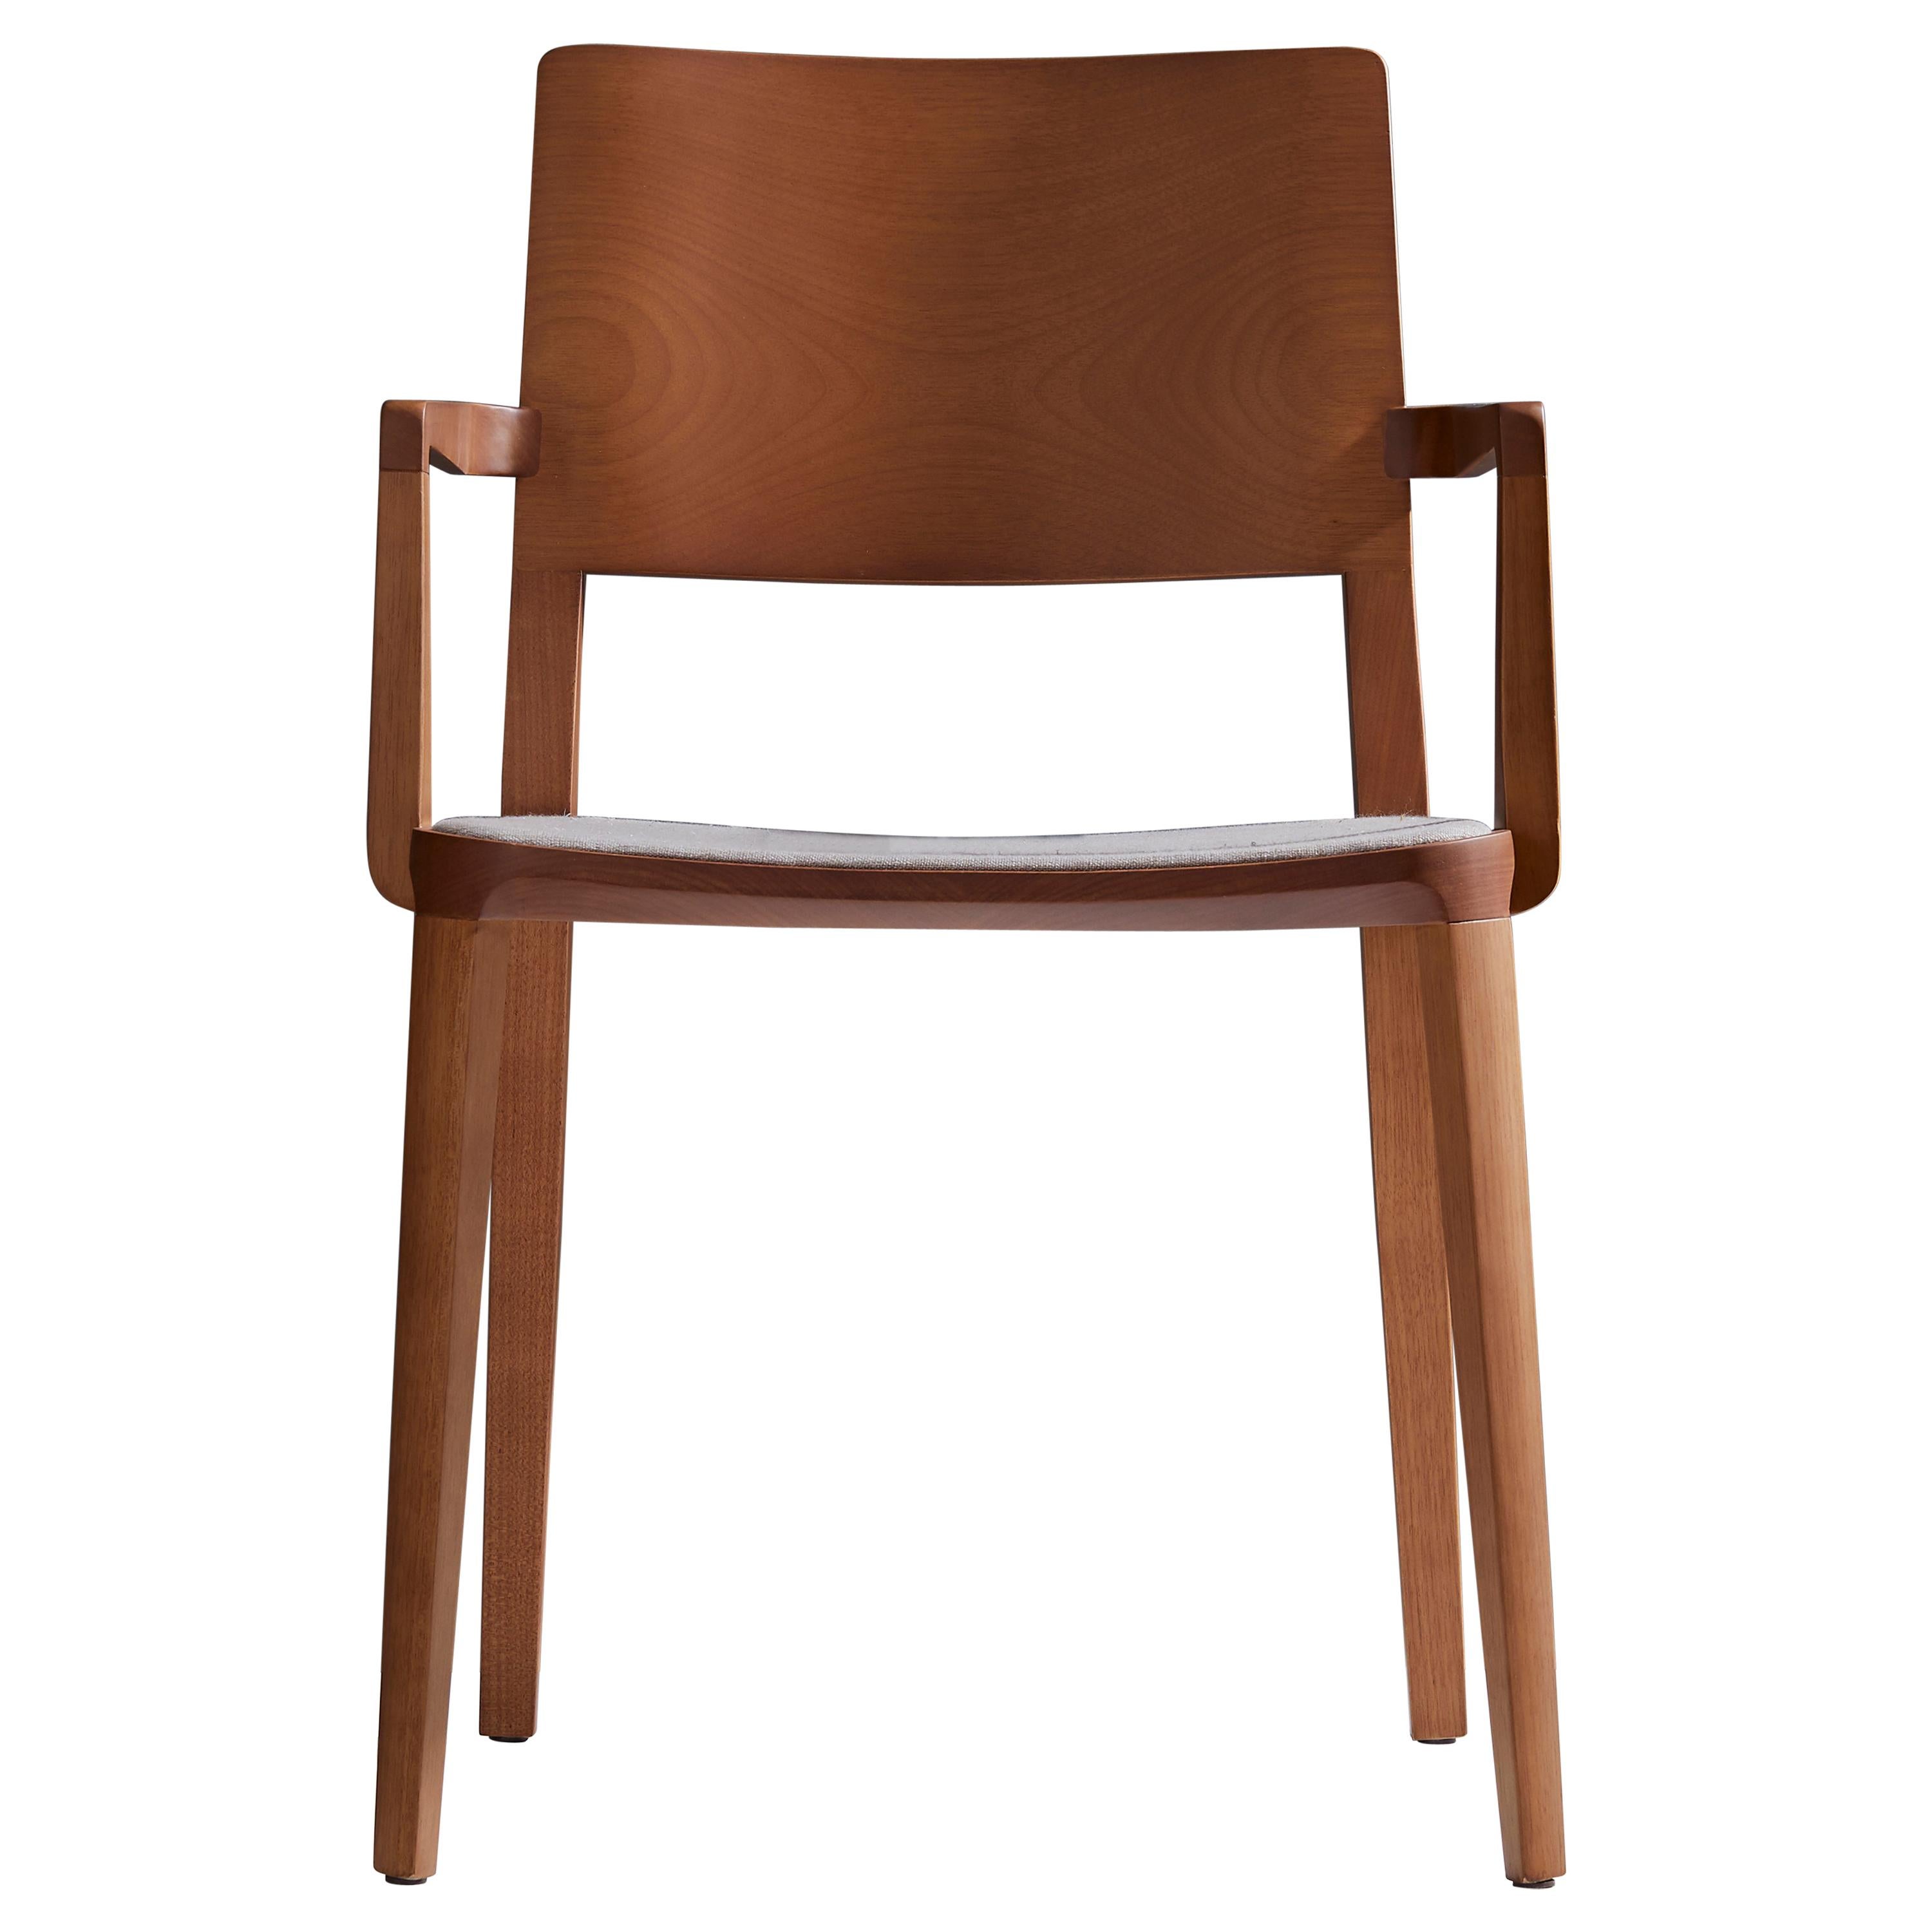 Minimalist Modern Chair in Natural Solid Wood Upholstered Seating with Arms